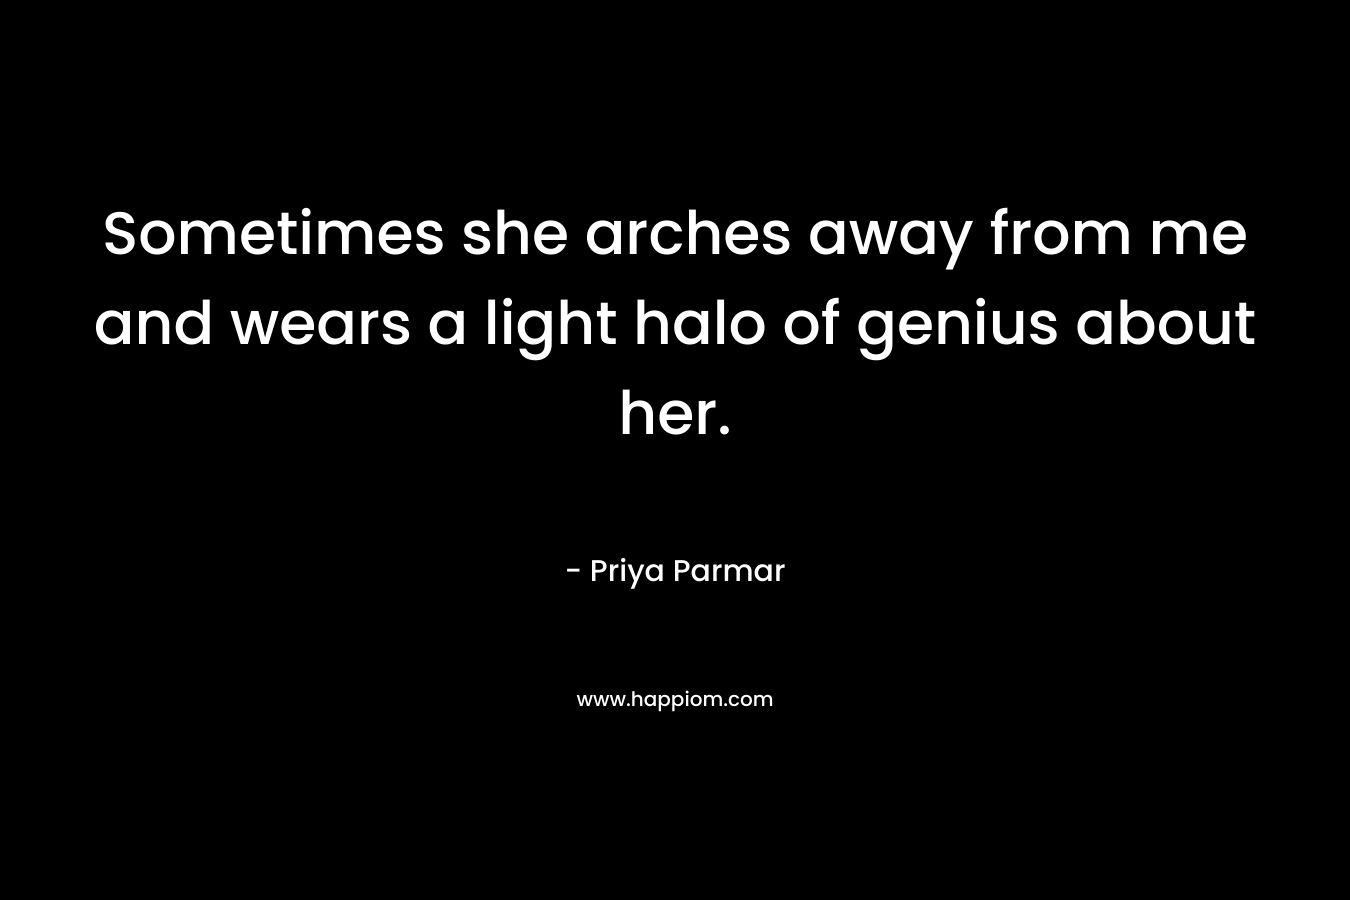 Sometimes she arches away from me and wears a light halo of genius about her.